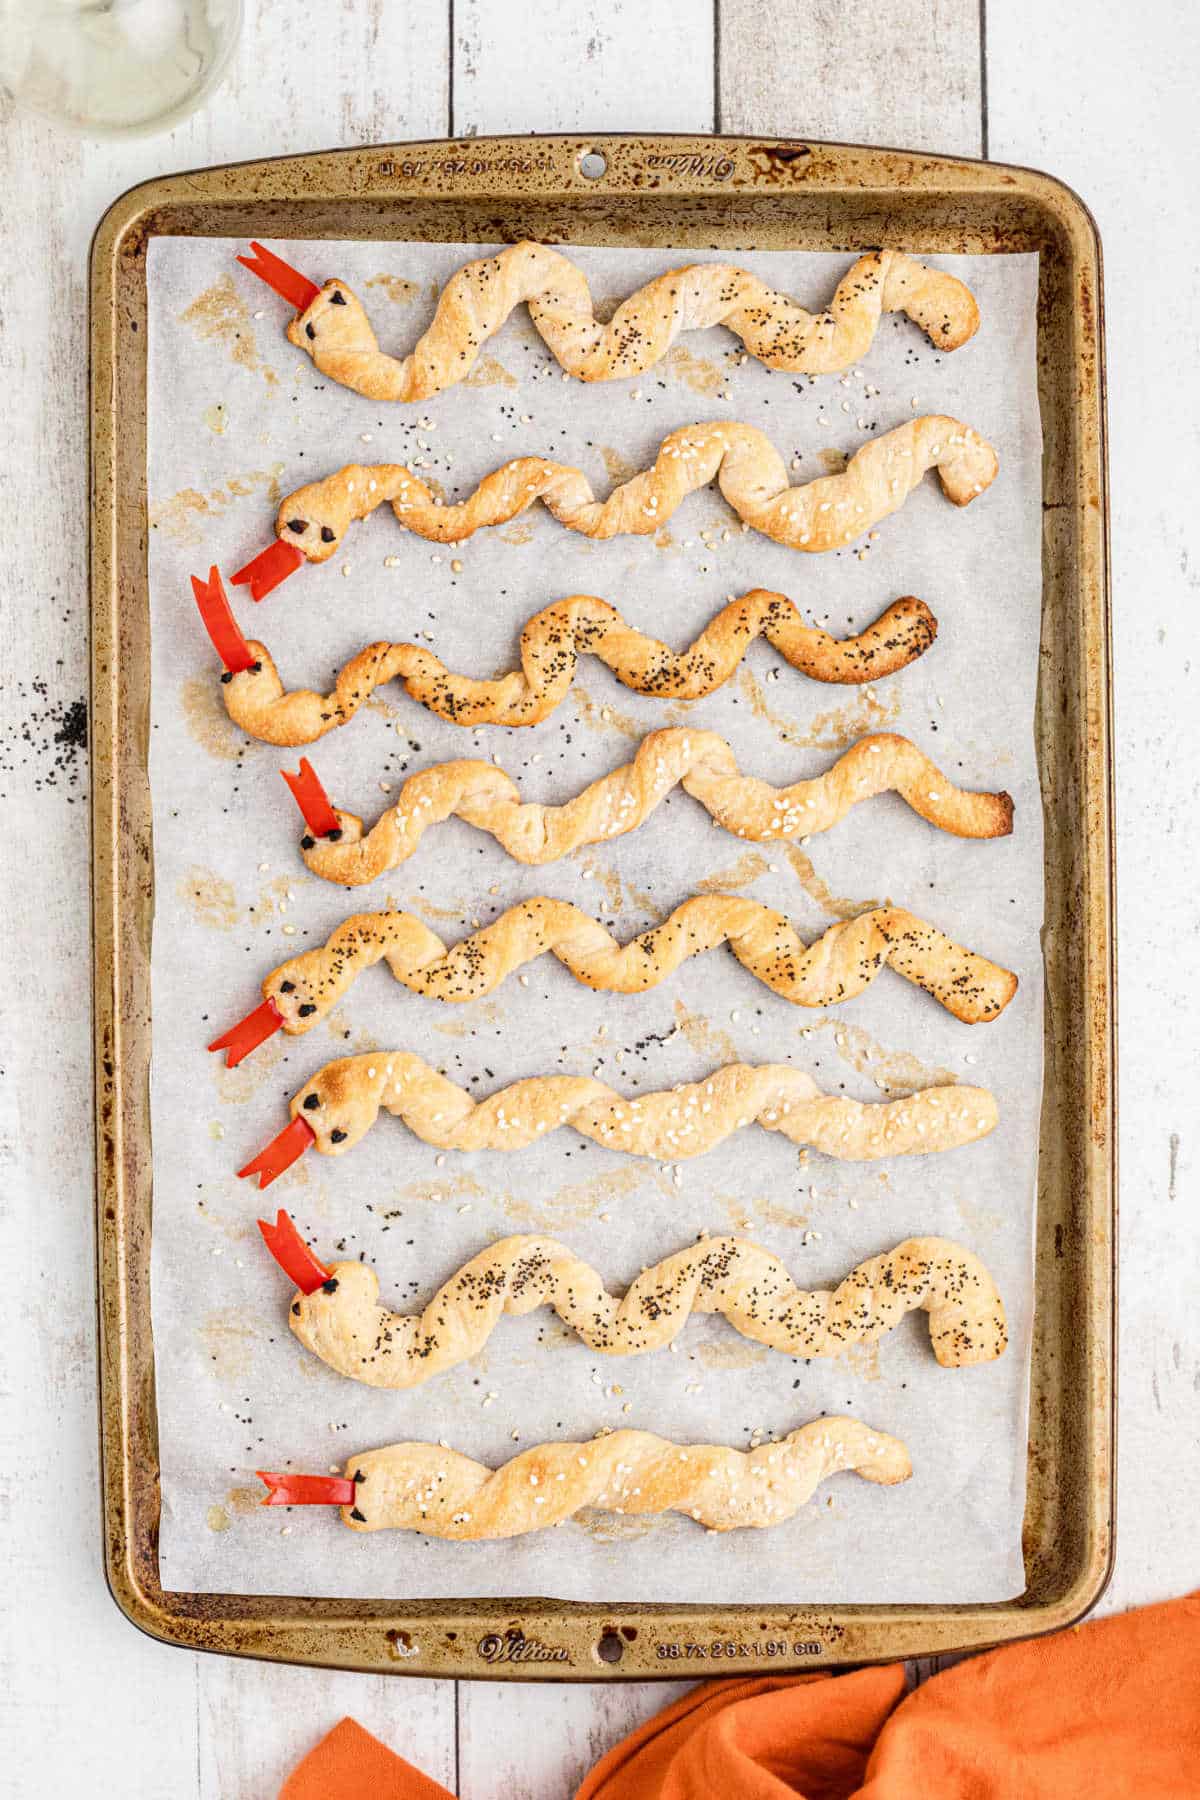 A baking sheet with finished breadstick snakes.